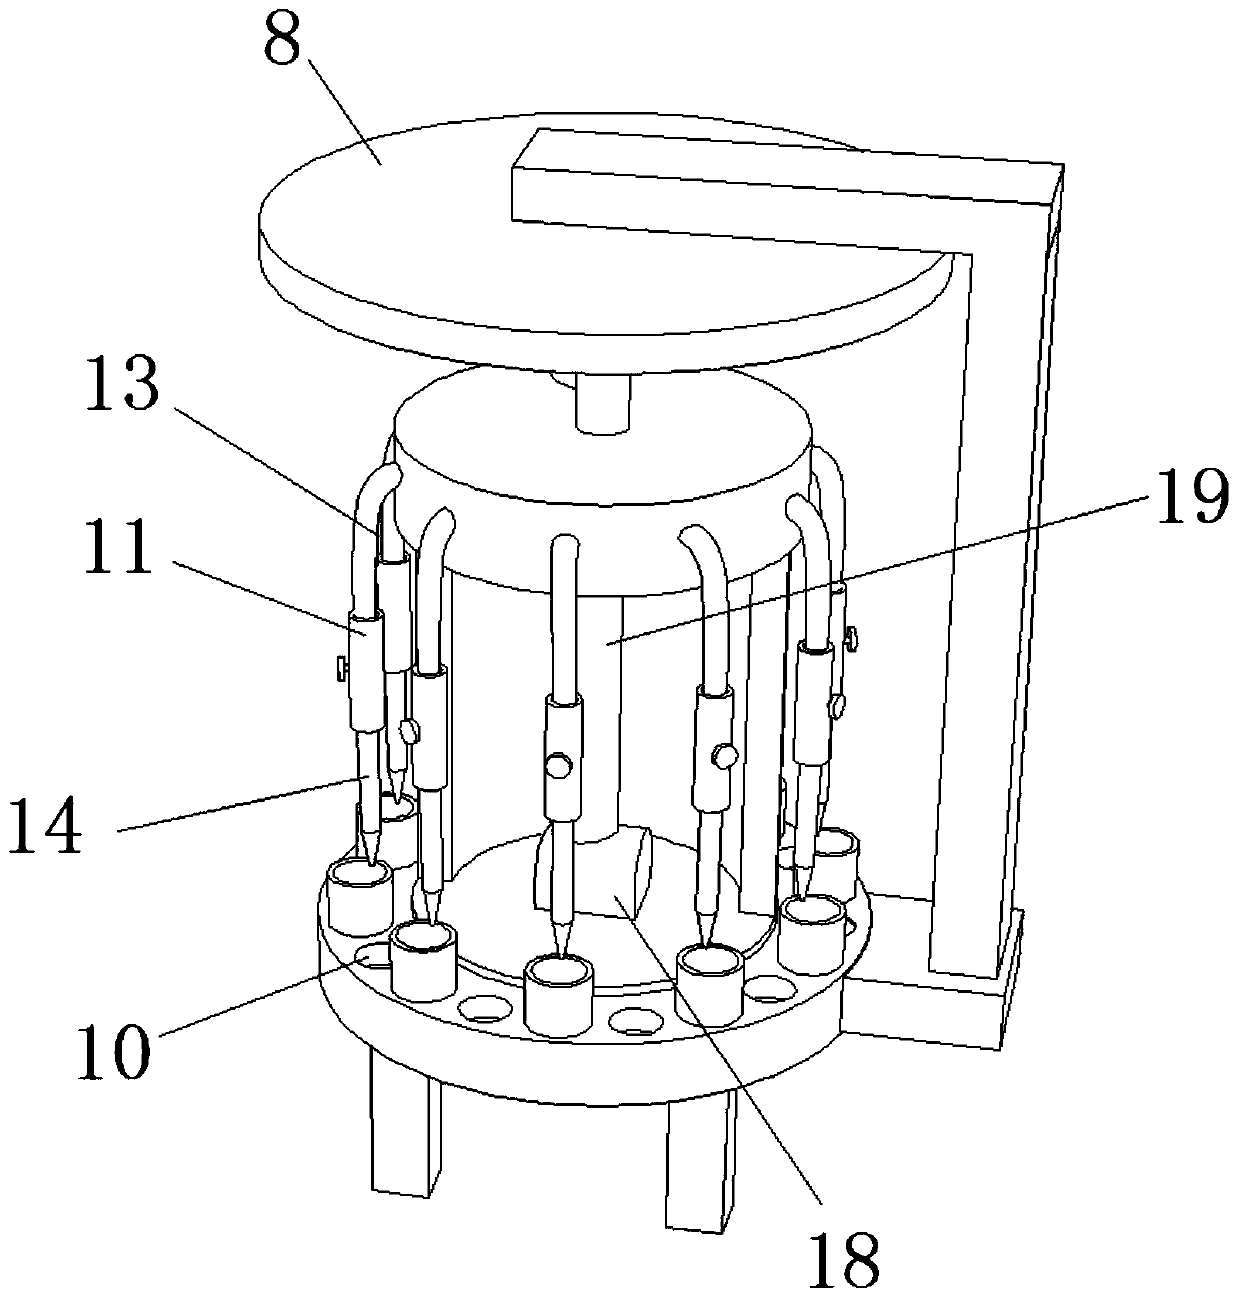 Metering and filling device used in camellia seed oil production process